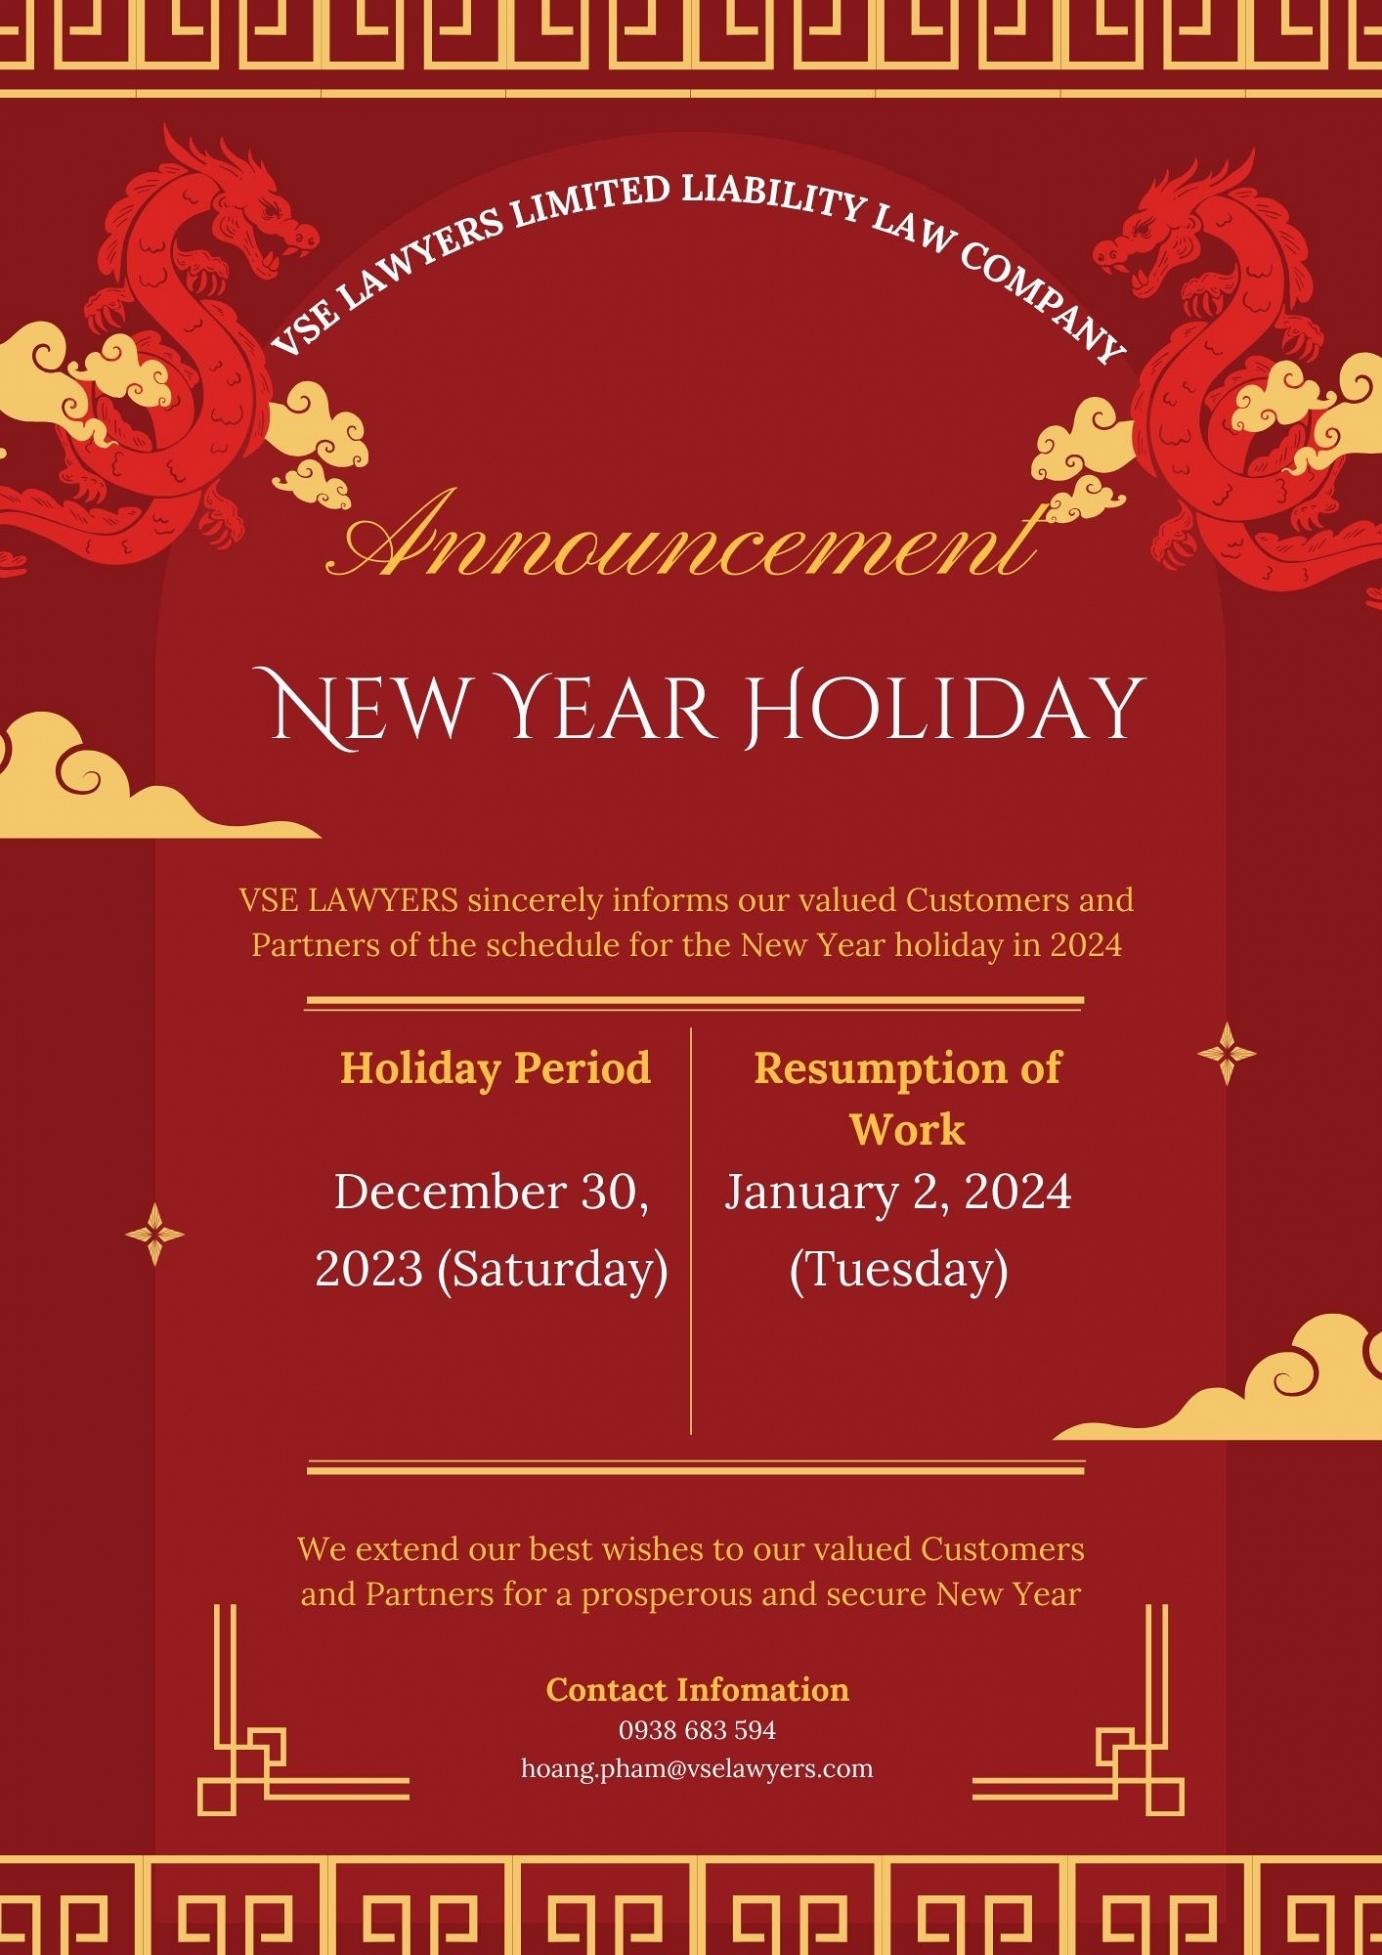 ANNOUNCEMENT OF NEW YEAR HOLIDAY